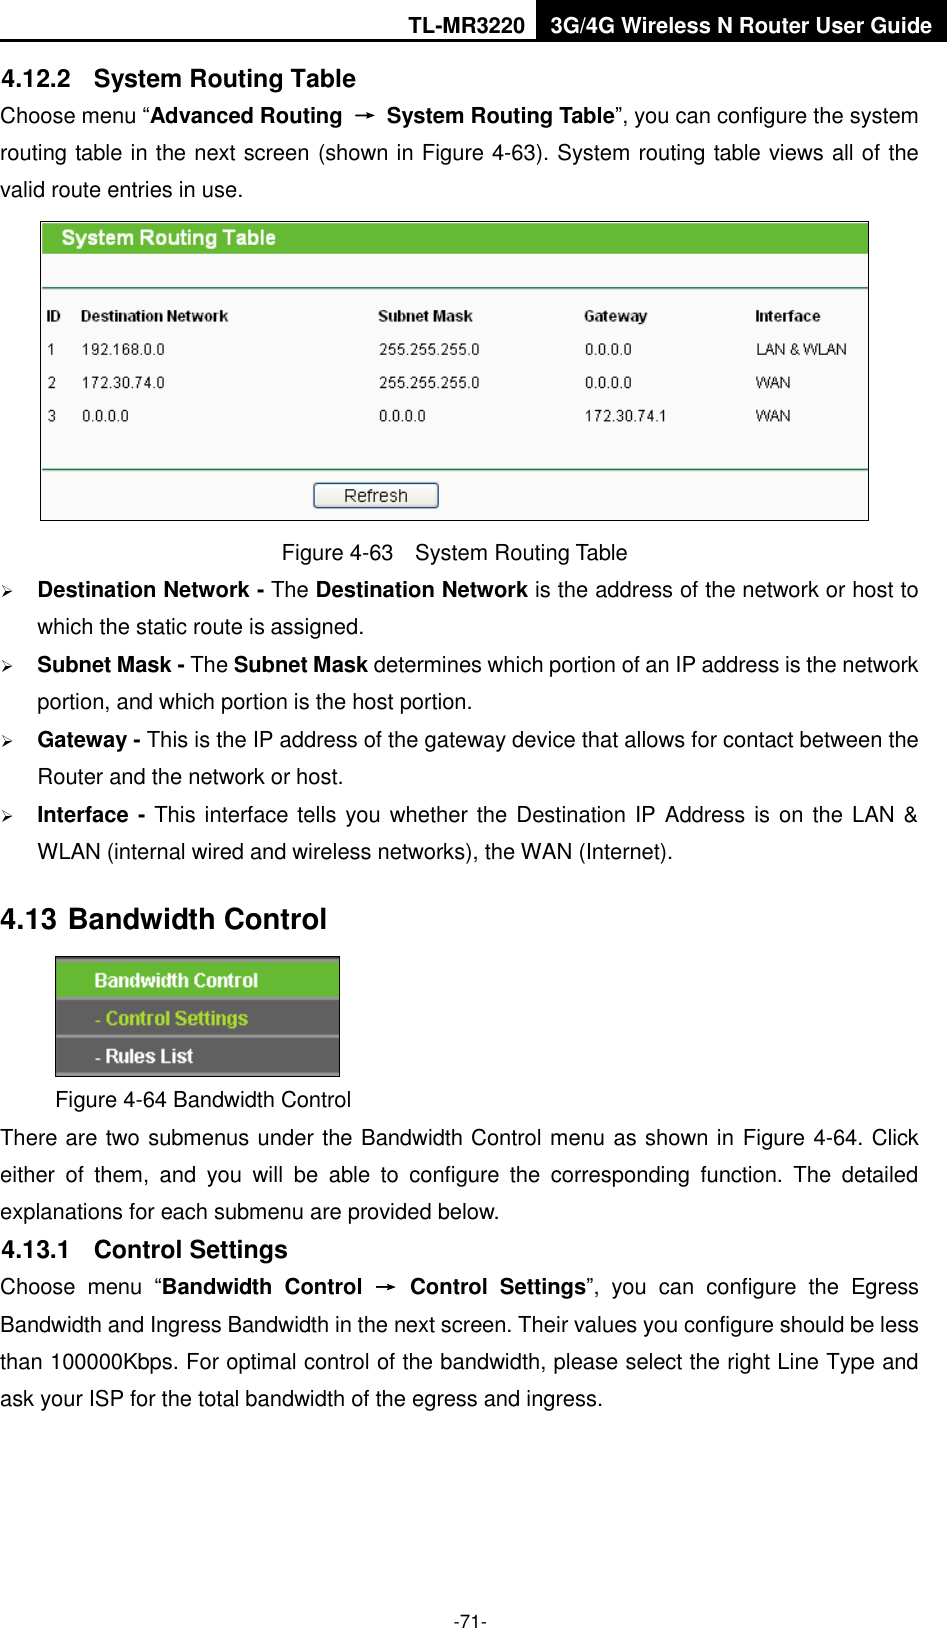 TL-MR3220 3G/4G Wireless N Router User Guide  -71- 4.12.2  System Routing Table Choose menu “Advanced Routing  →  System Routing Table”, you can configure the system routing table in the next screen (shown in Figure 4-63). System routing table views all of the valid route entries in use.  Figure 4-63  System Routing Table  Destination Network - The Destination Network is the address of the network or host to which the static route is assigned.  Subnet Mask - The Subnet Mask determines which portion of an IP address is the network portion, and which portion is the host portion.  Gateway - This is the IP address of the gateway device that allows for contact between the Router and the network or host.  Interface - This interface tells you whether the Destination IP Address is on the LAN &amp; WLAN (internal wired and wireless networks), the WAN (Internet). 4.13 Bandwidth Control  Figure 4-64 Bandwidth Control There are two submenus under the Bandwidth Control menu as shown in Figure 4-64. Click either  of  them,  and  you  will  be  able  to  configure  the  corresponding  function.  The  detailed explanations for each submenu are provided below. 4.13.1  Control Settings Choose  menu  “Bandwidth  Control  →  Control  Settings”,  you  can  configure  the  Egress Bandwidth and Ingress Bandwidth in the next screen. Their values you configure should be less than 100000Kbps. For optimal control of the bandwidth, please select the right Line Type and ask your ISP for the total bandwidth of the egress and ingress. 